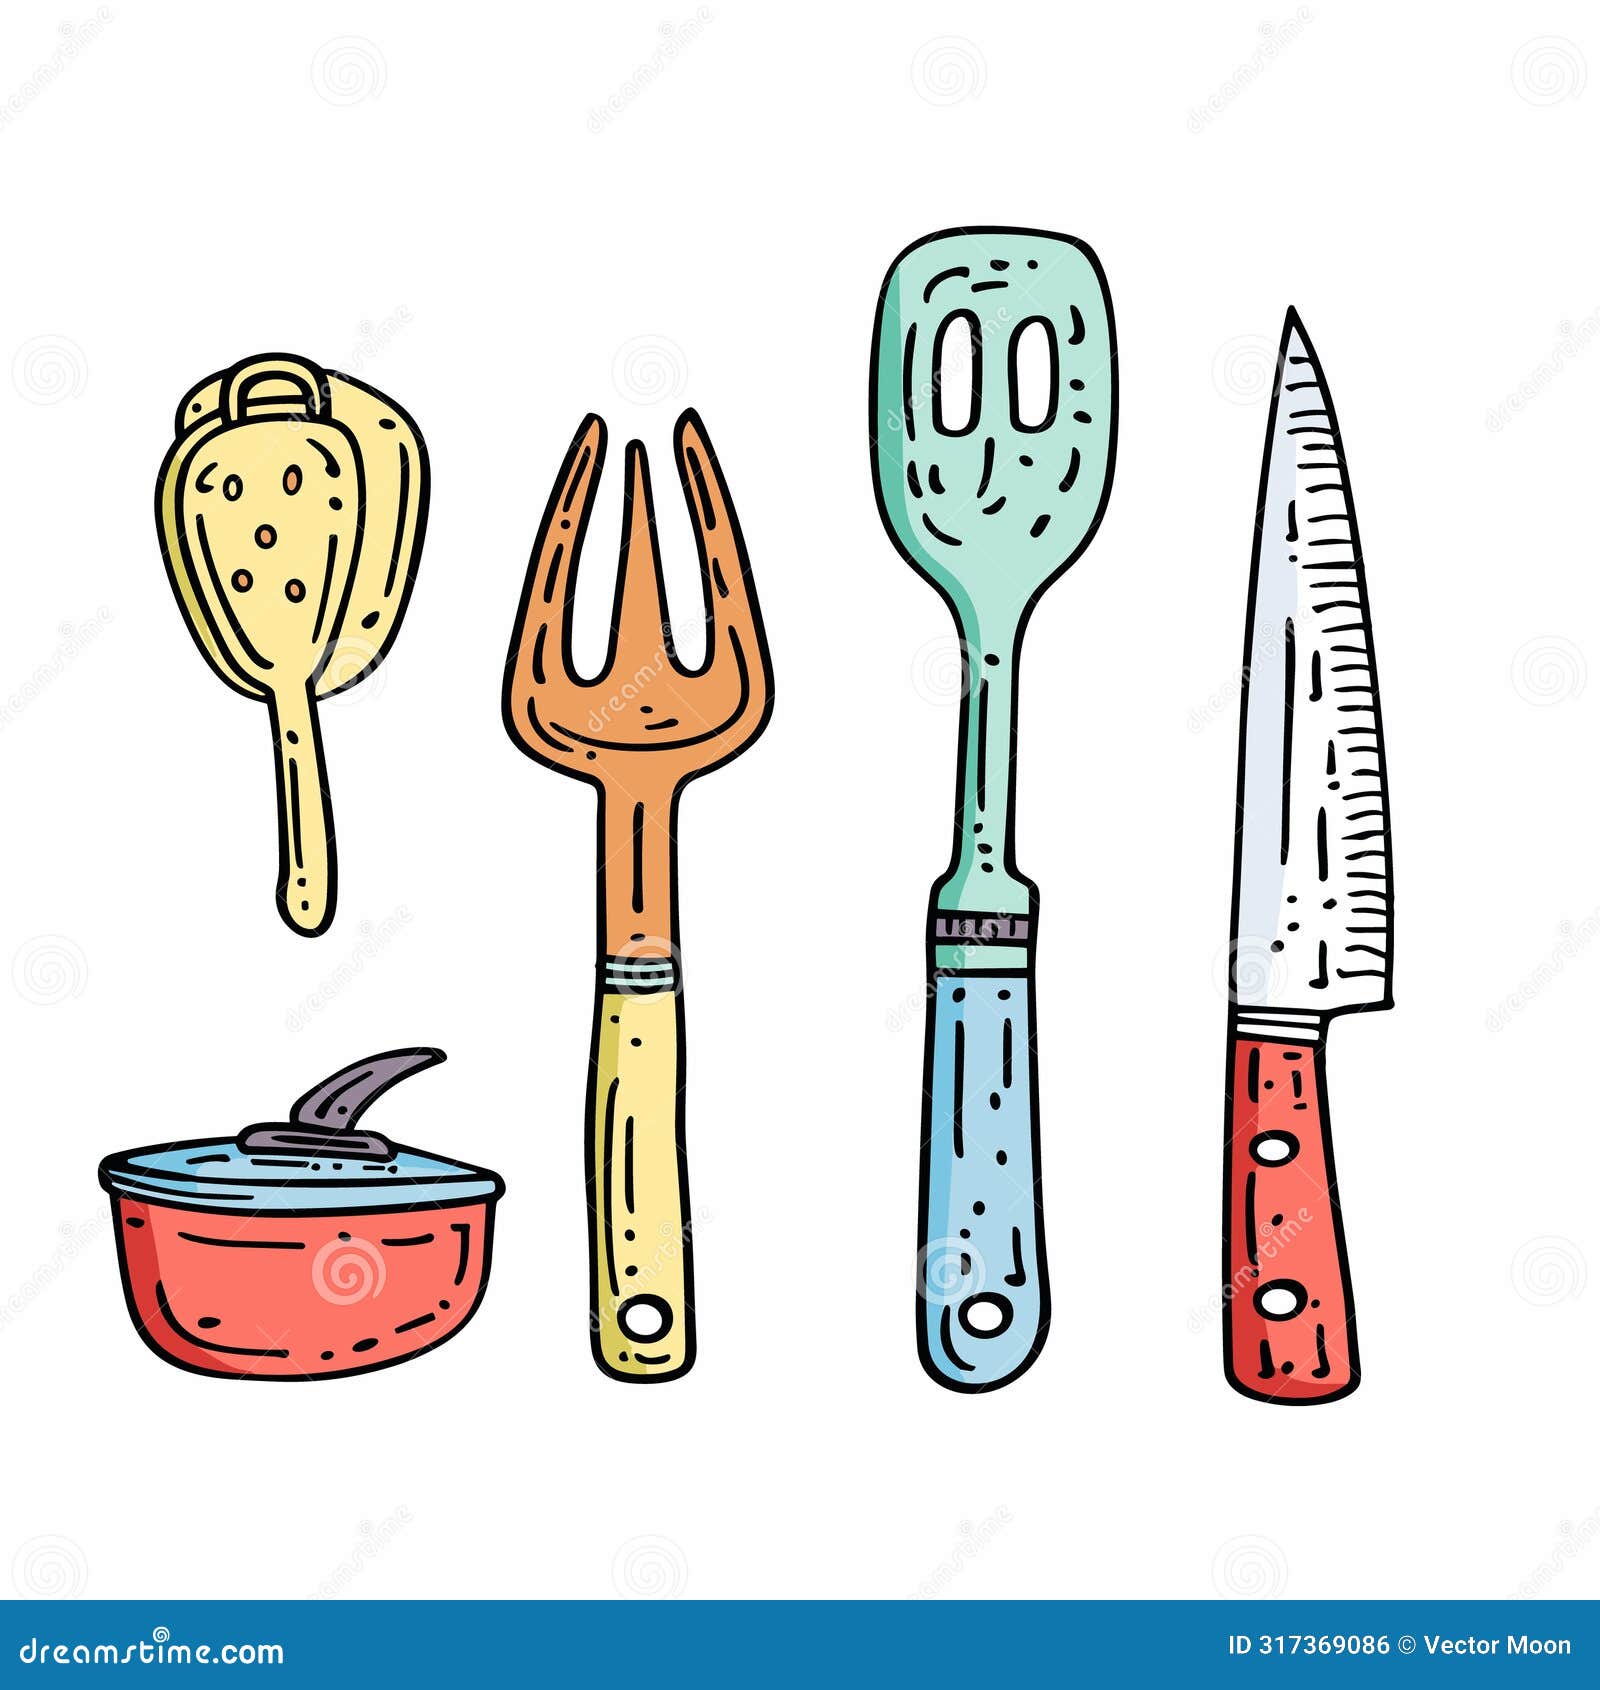 handdrawn kitchen utensils colorful set featuring spatula, fork, slotted spoon, knife, pot soup